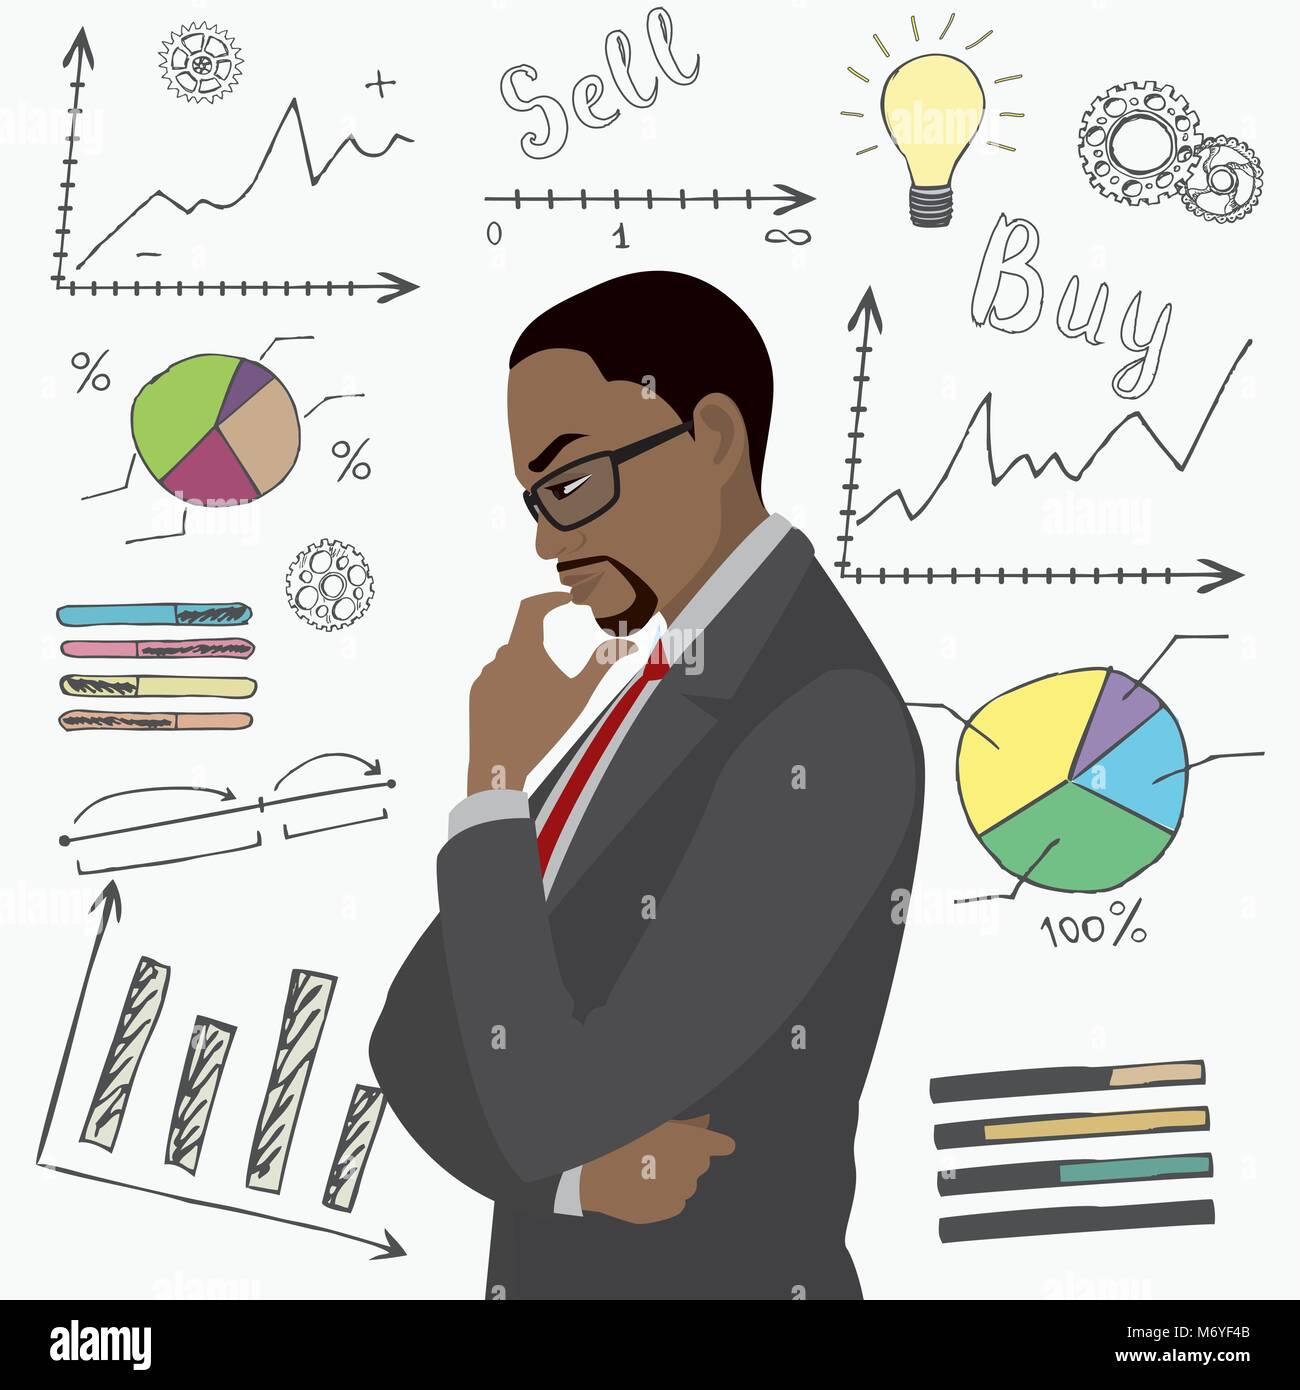 Black Businessman thinks about problem,doodle hand drawn business elements or icons on background, stock vector illustration Stock Vector